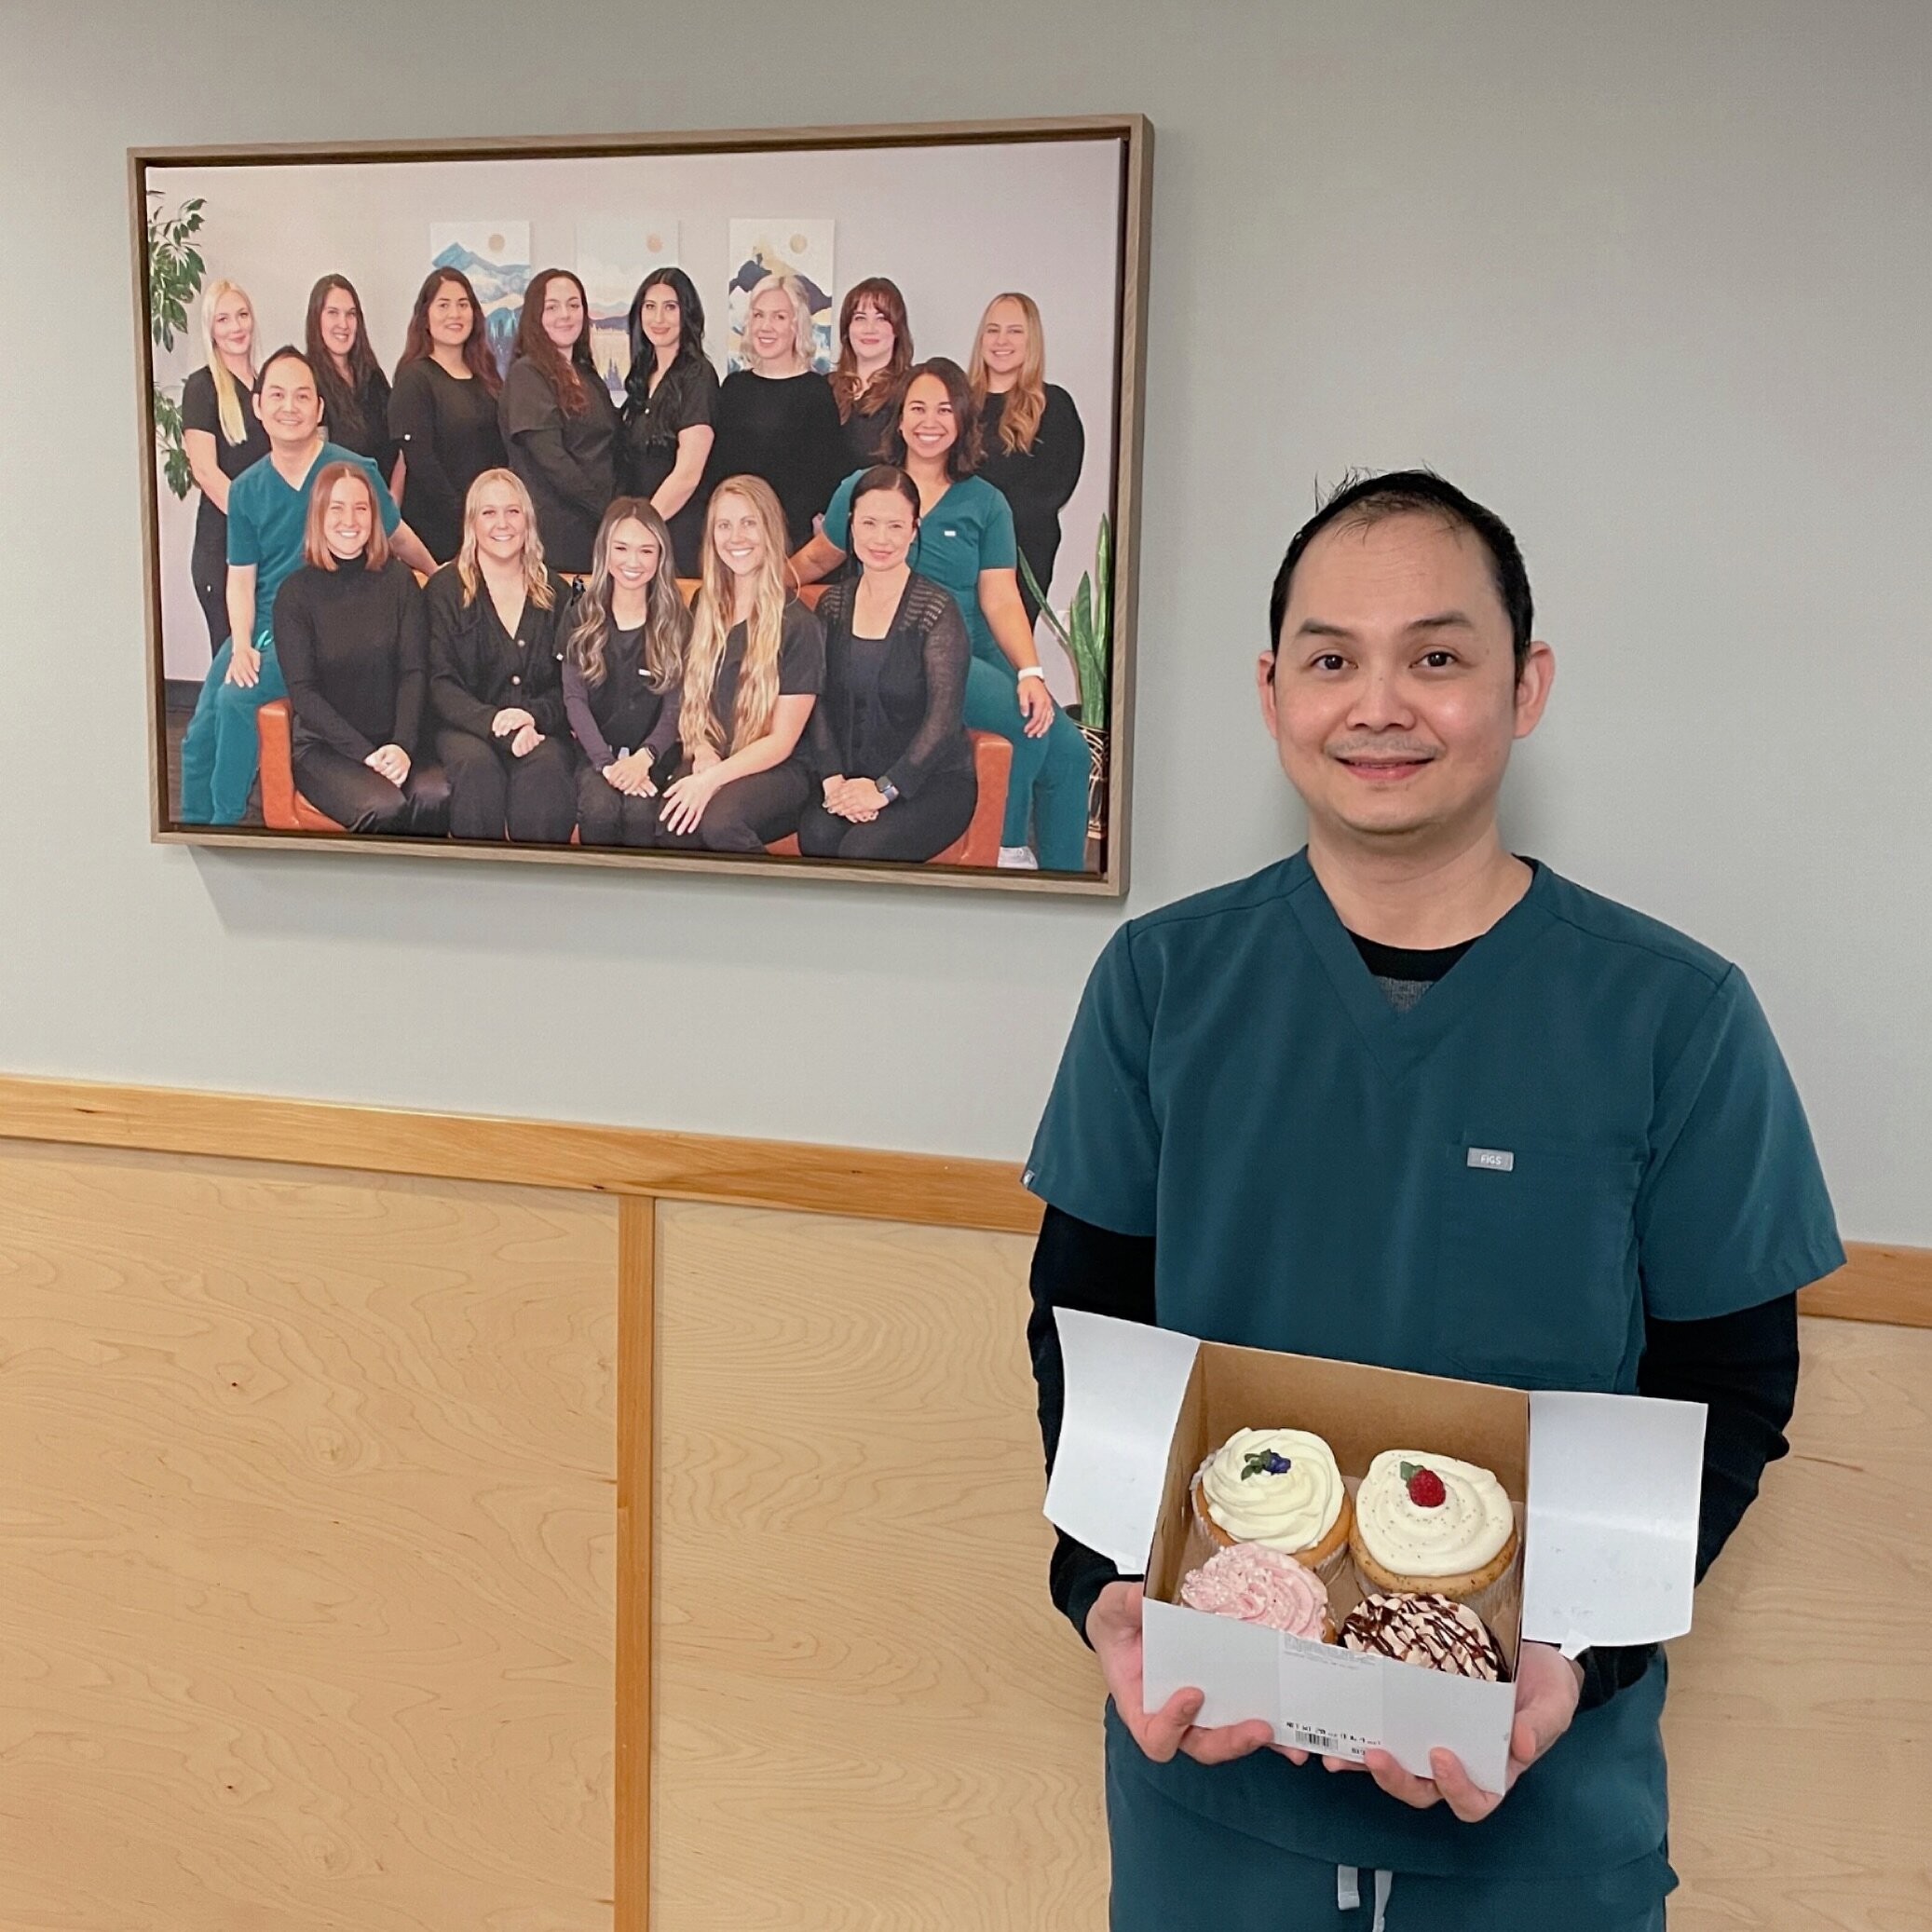 This week we had the chance to celebrate two fantastic years with one of our amazing Tooth Docs, Dr. Tong! Your dedication and expertise have truly made a difference in the lives of our patients.Here&rsquo;s to many more years of sharing your singing